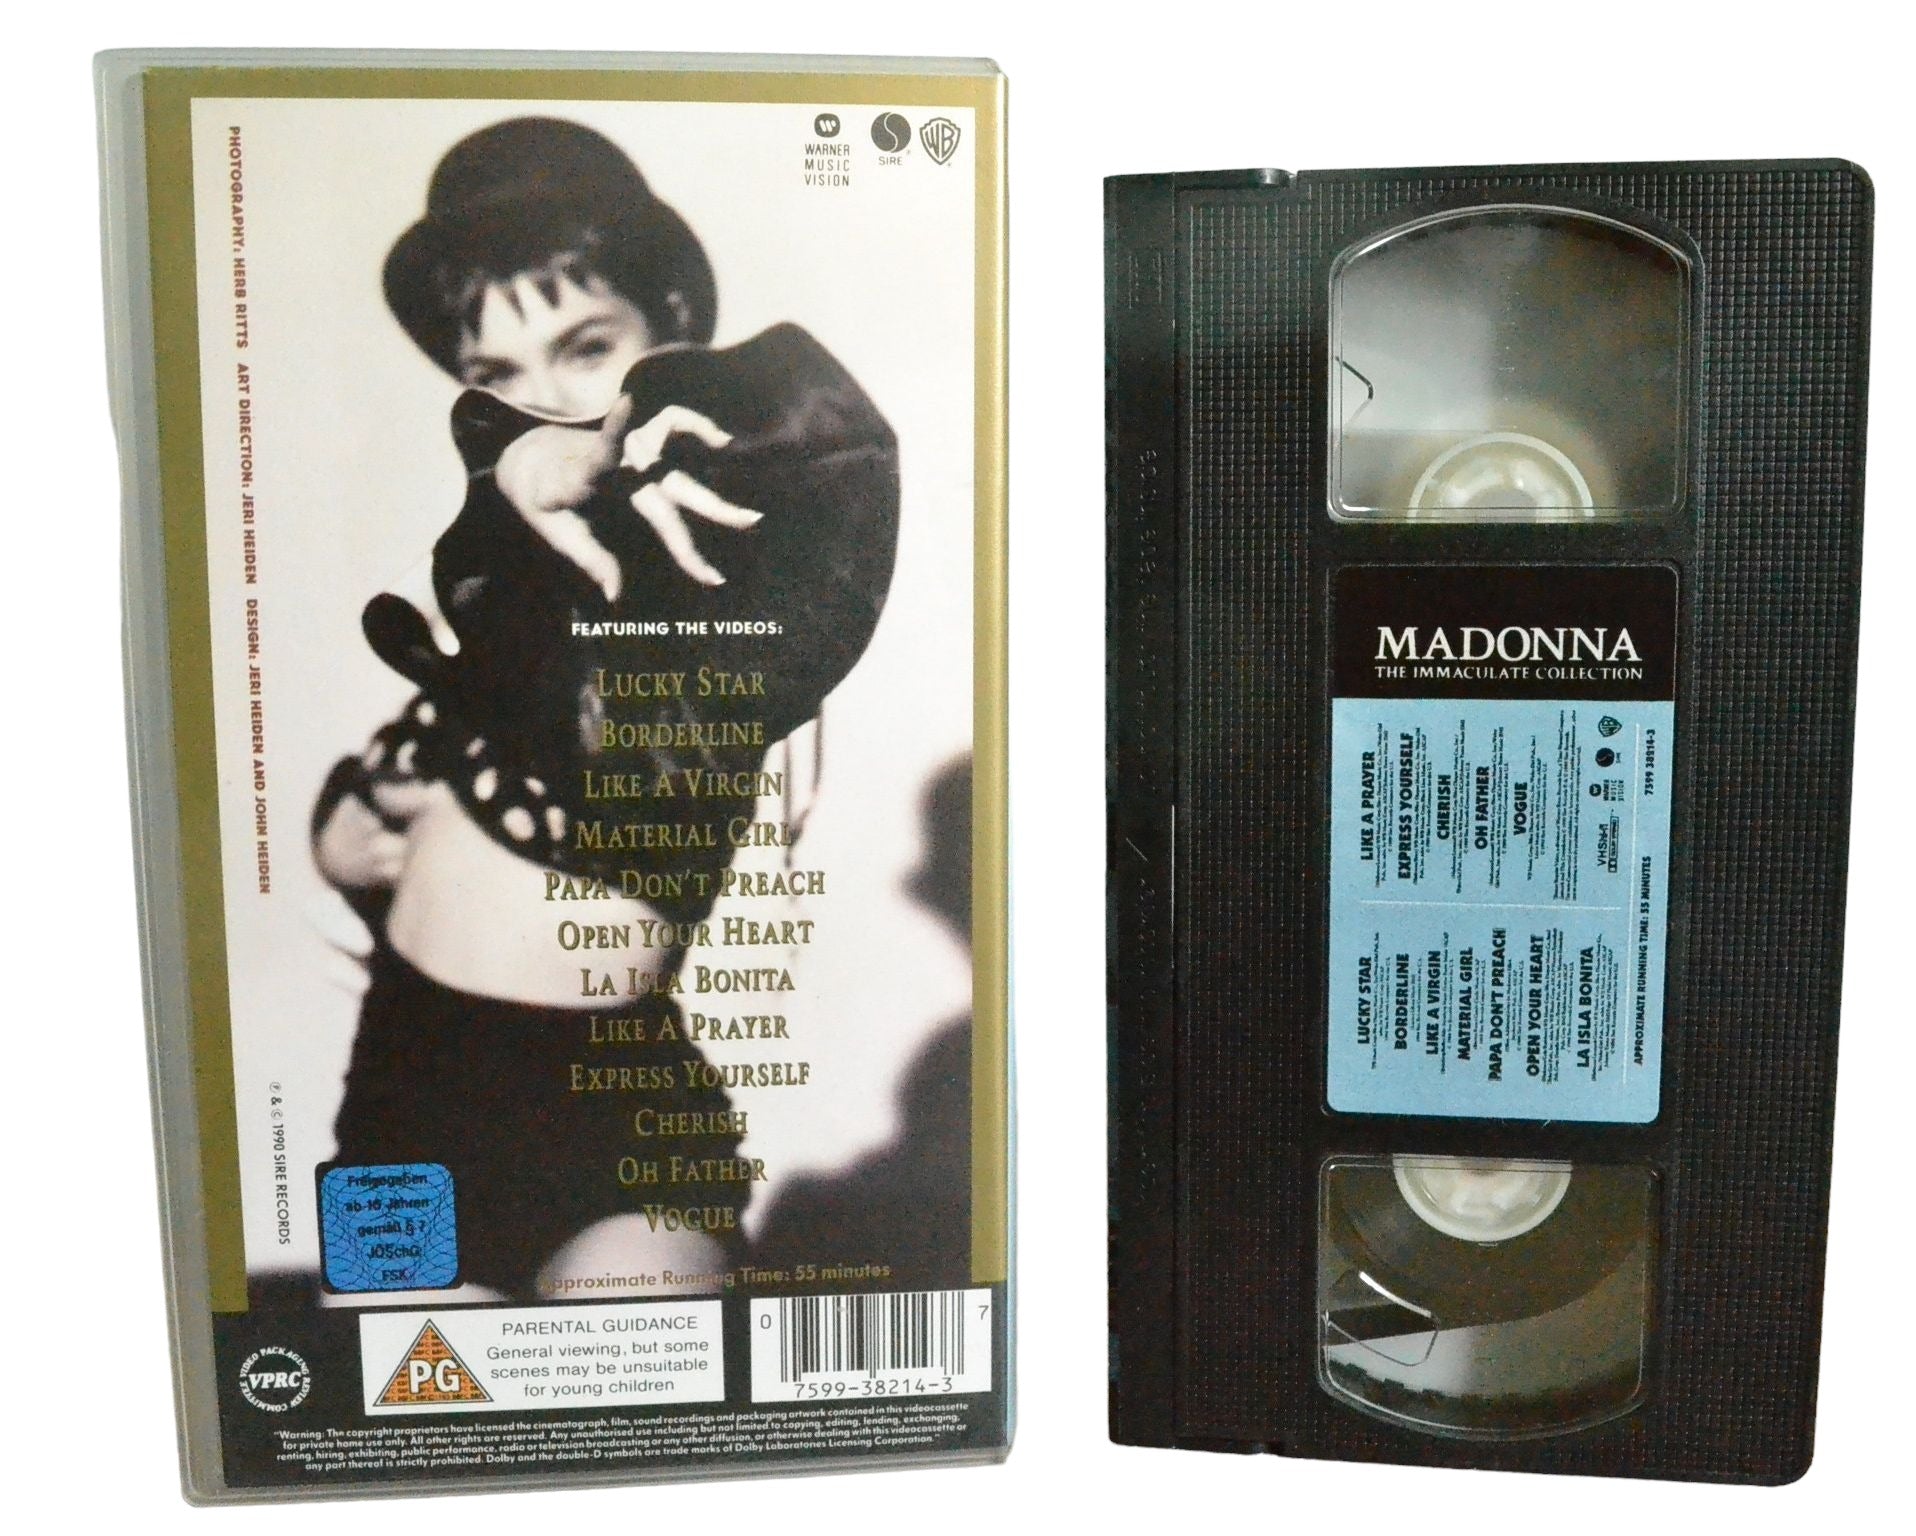 Madonna : The Immaculate Collection - Madonna - Warner Music Video - 7599382143 - Drama - Pal - VHS-